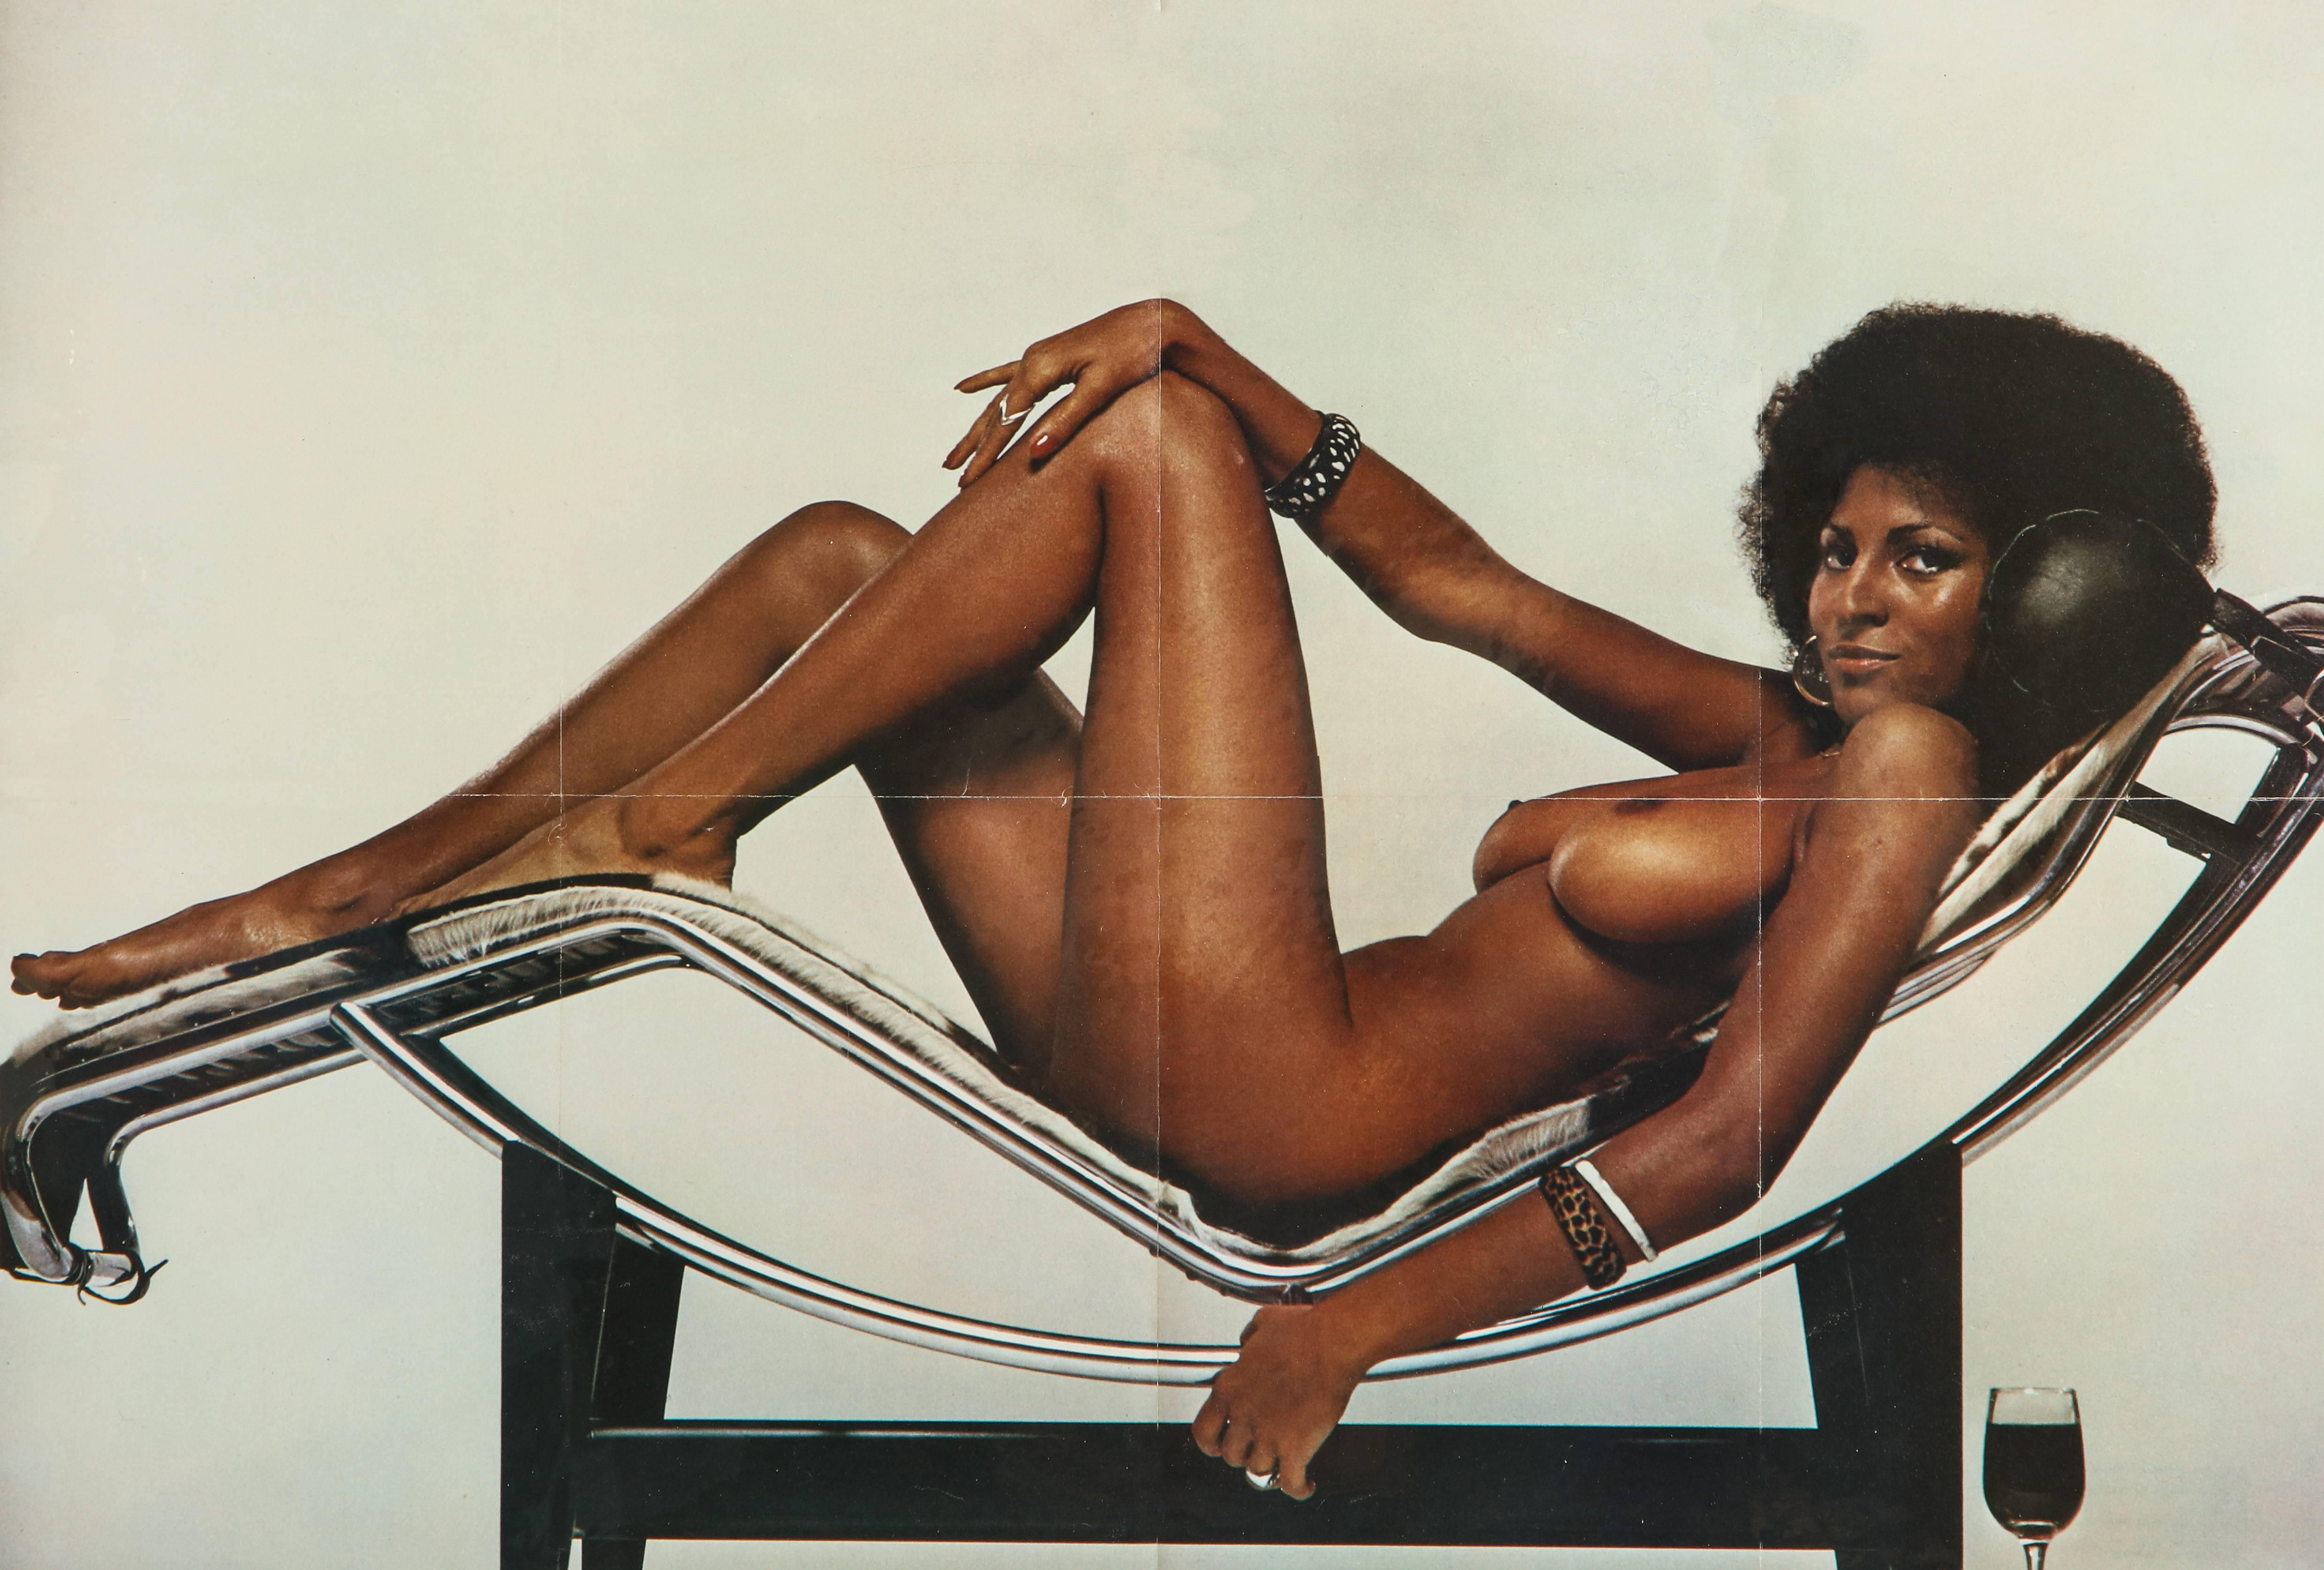 Pulp International - 1974 nude image of Pam Grier